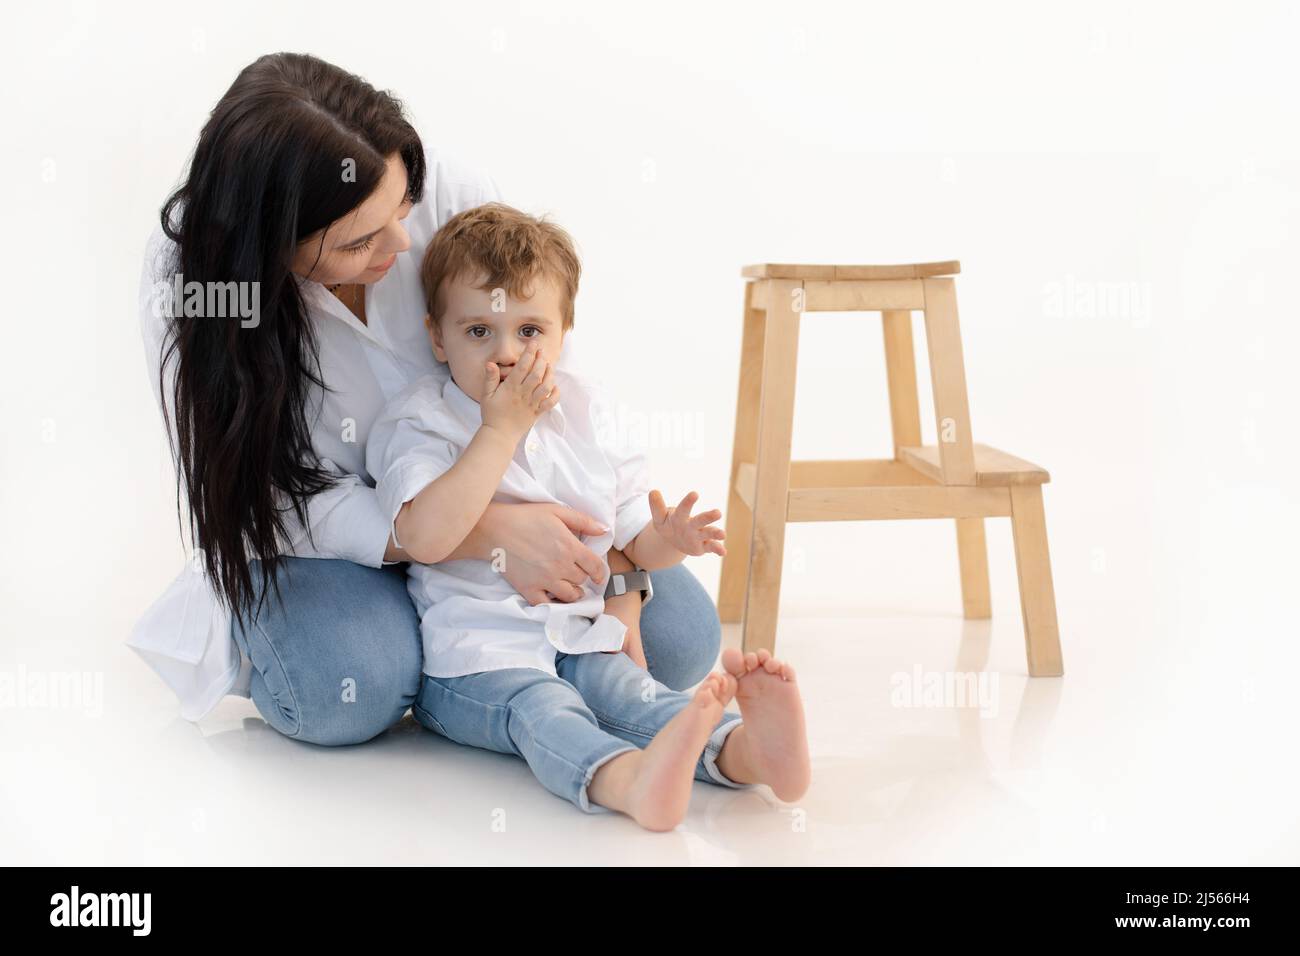 Caring woman and boy hugging, spending time together. Close bounding between mother and son, quieting, sitting on floor Stock Photo